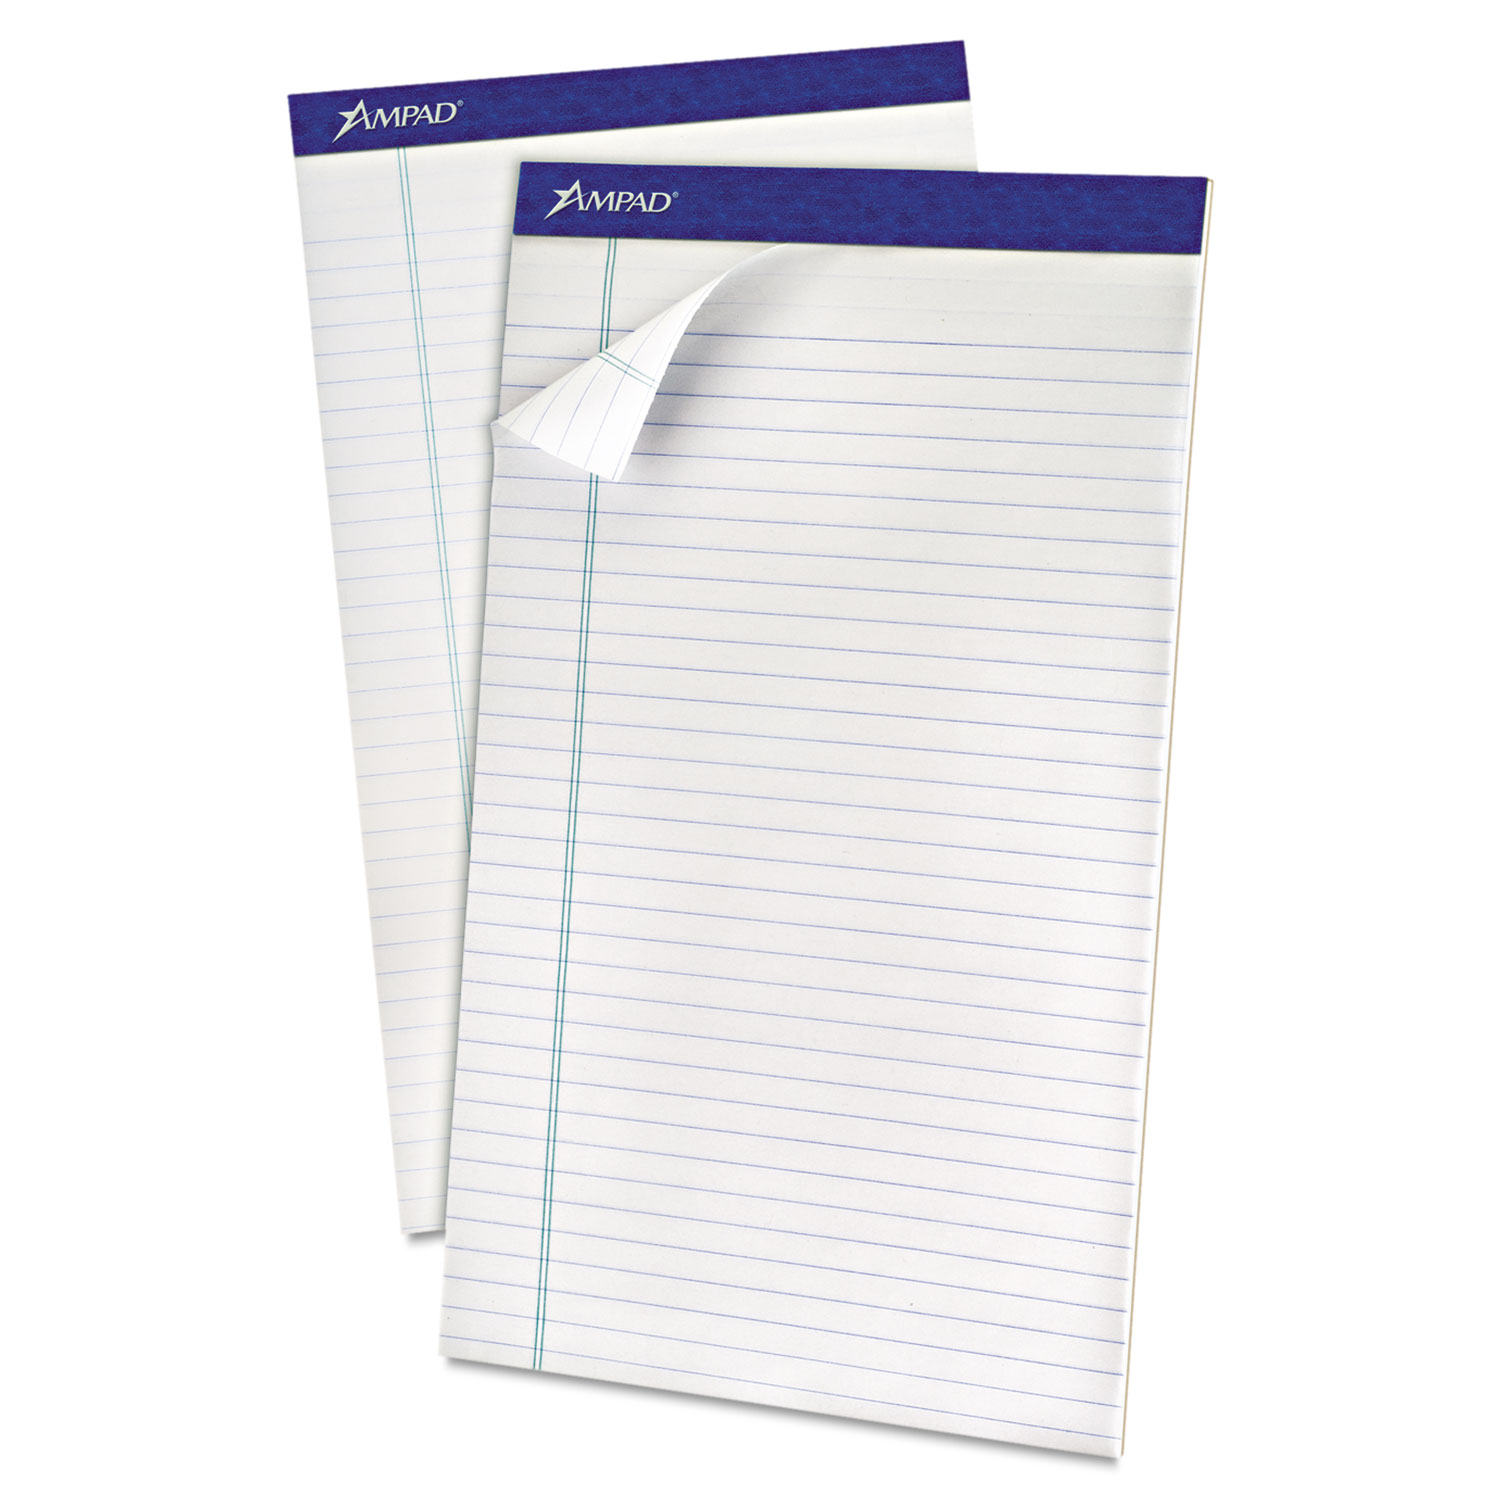  Ampad 20-180 Recycled Writing Pads, Wide/Legal Rule, 8.5 x 14, White, 50 Sheets, Dozen (TOP20180) 